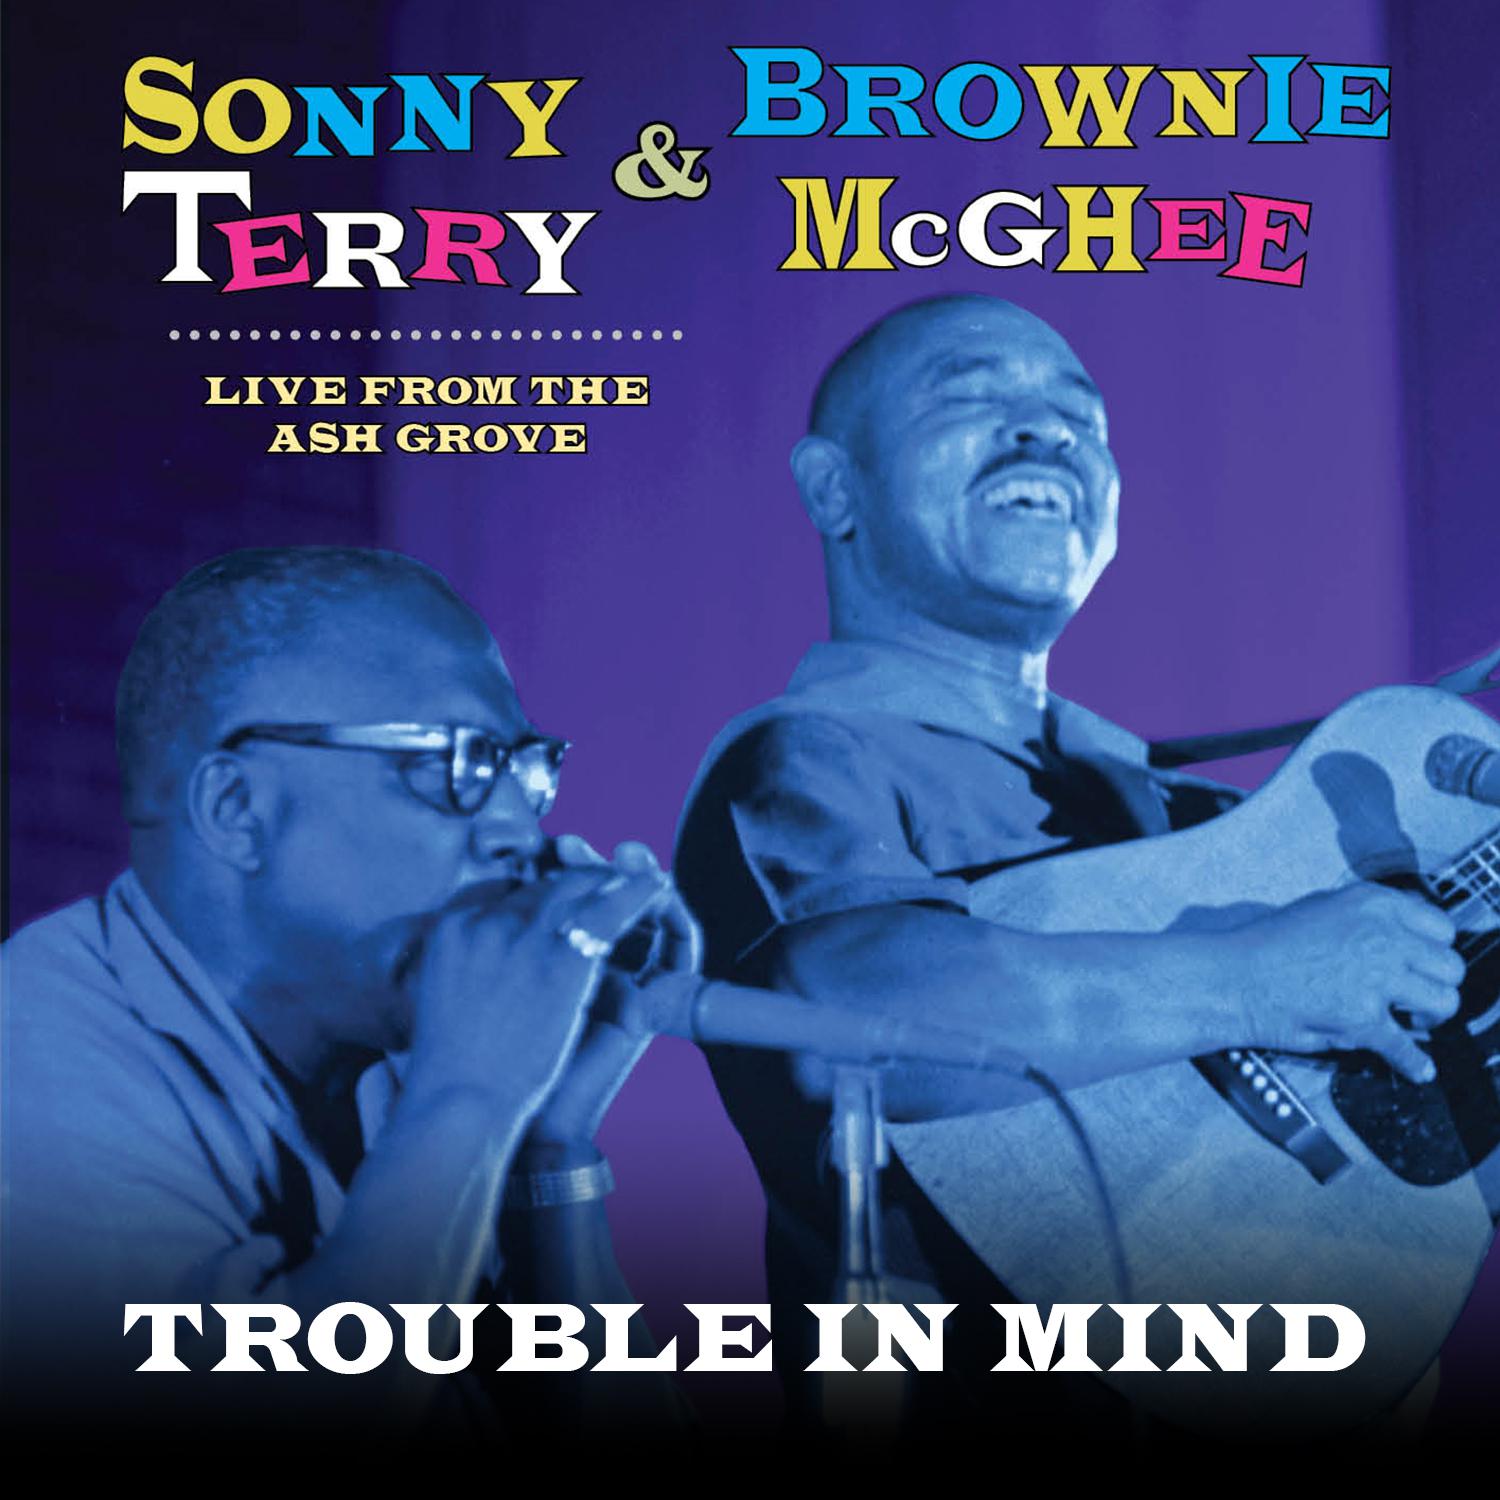 Sonny Terry - Trouble In Mind (February 21, 1973 Ash Grove, Hollywood CA)